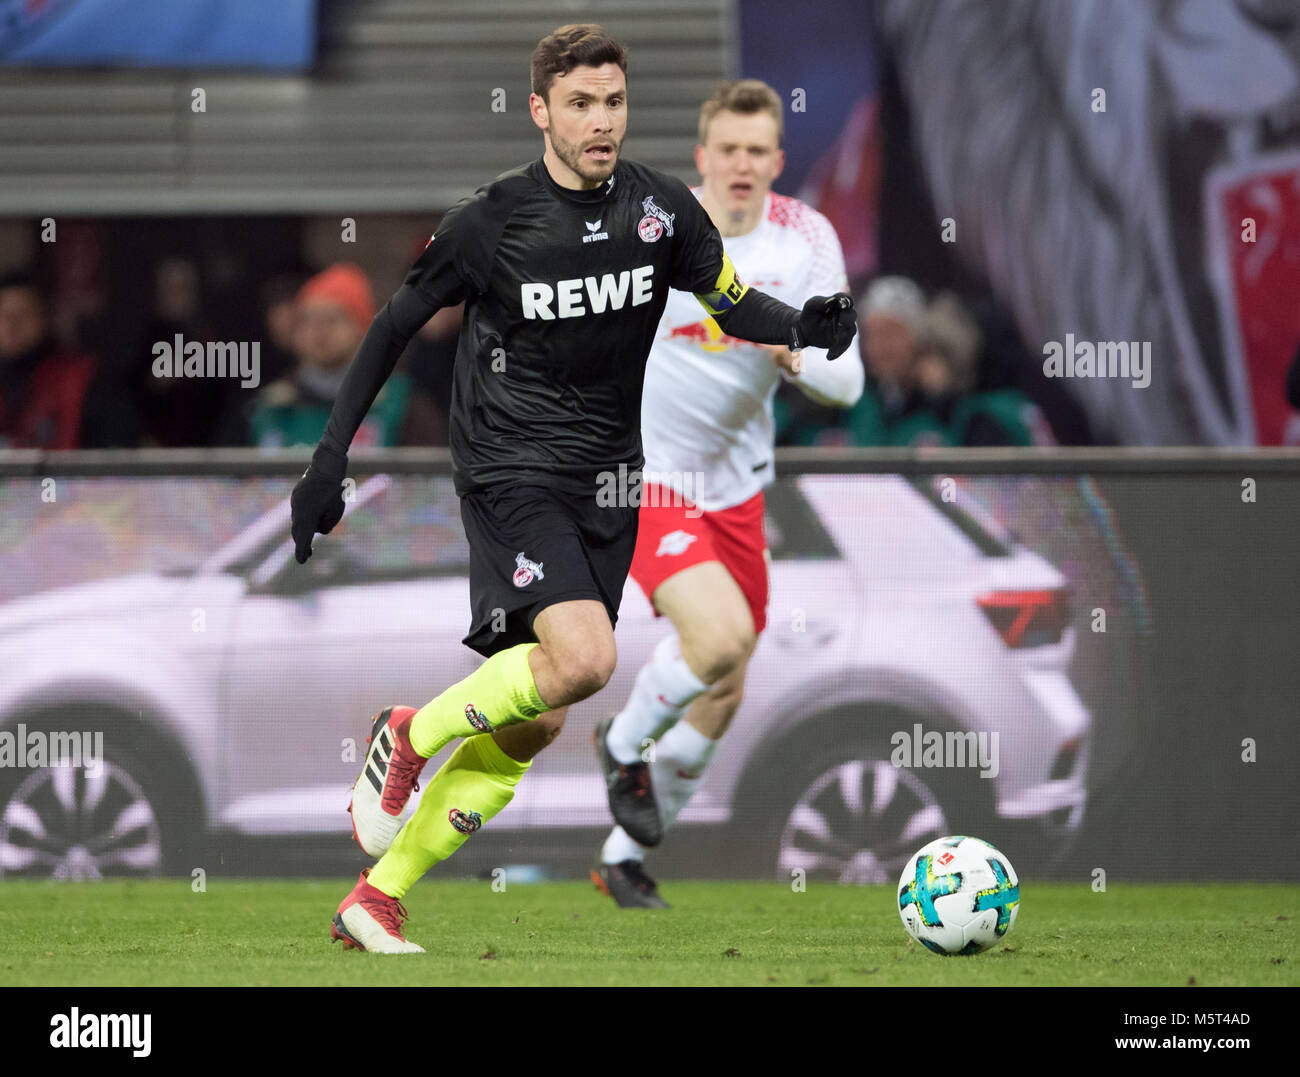 25 Febuary 2018, Germany, Leipzig: German Bundesliga soccer match between RB Leipzig and 1. FC Cologne, Red Bull Arena: Cologne's Jonas Hector in action. Photo: Soeren Stache/dpa - Nutzung nur nach vertraglicher Vereinbarung Stock Photo